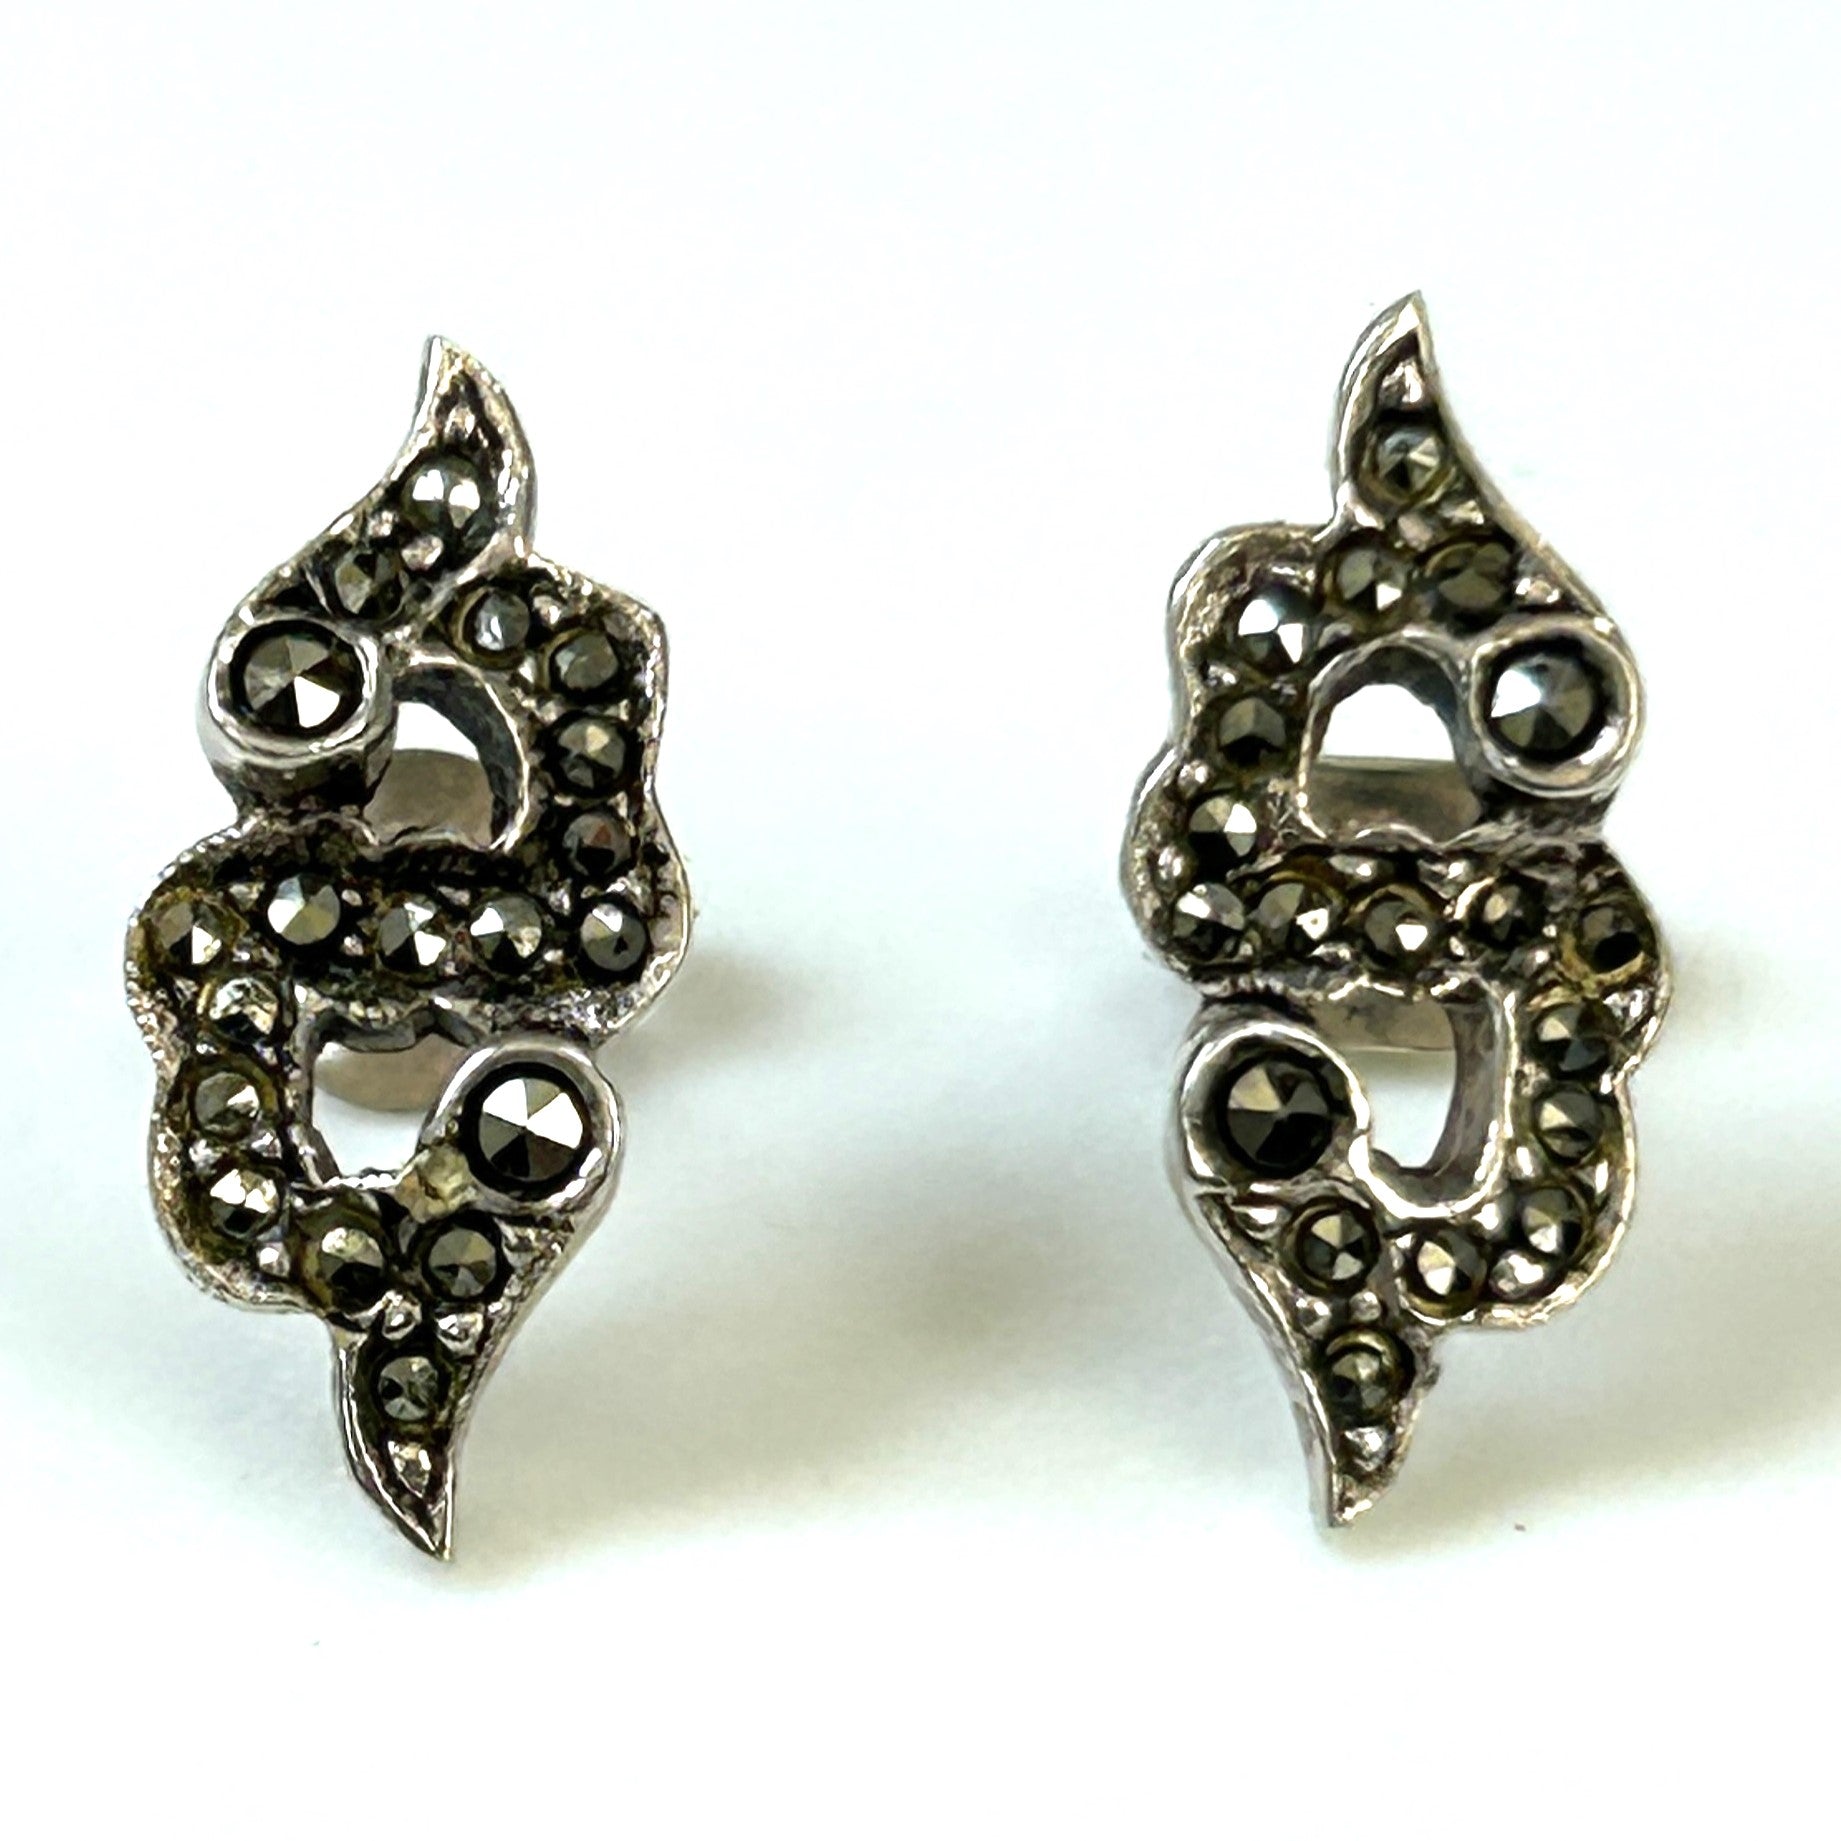 Vintage Silver and Marcasite Stud Earrings